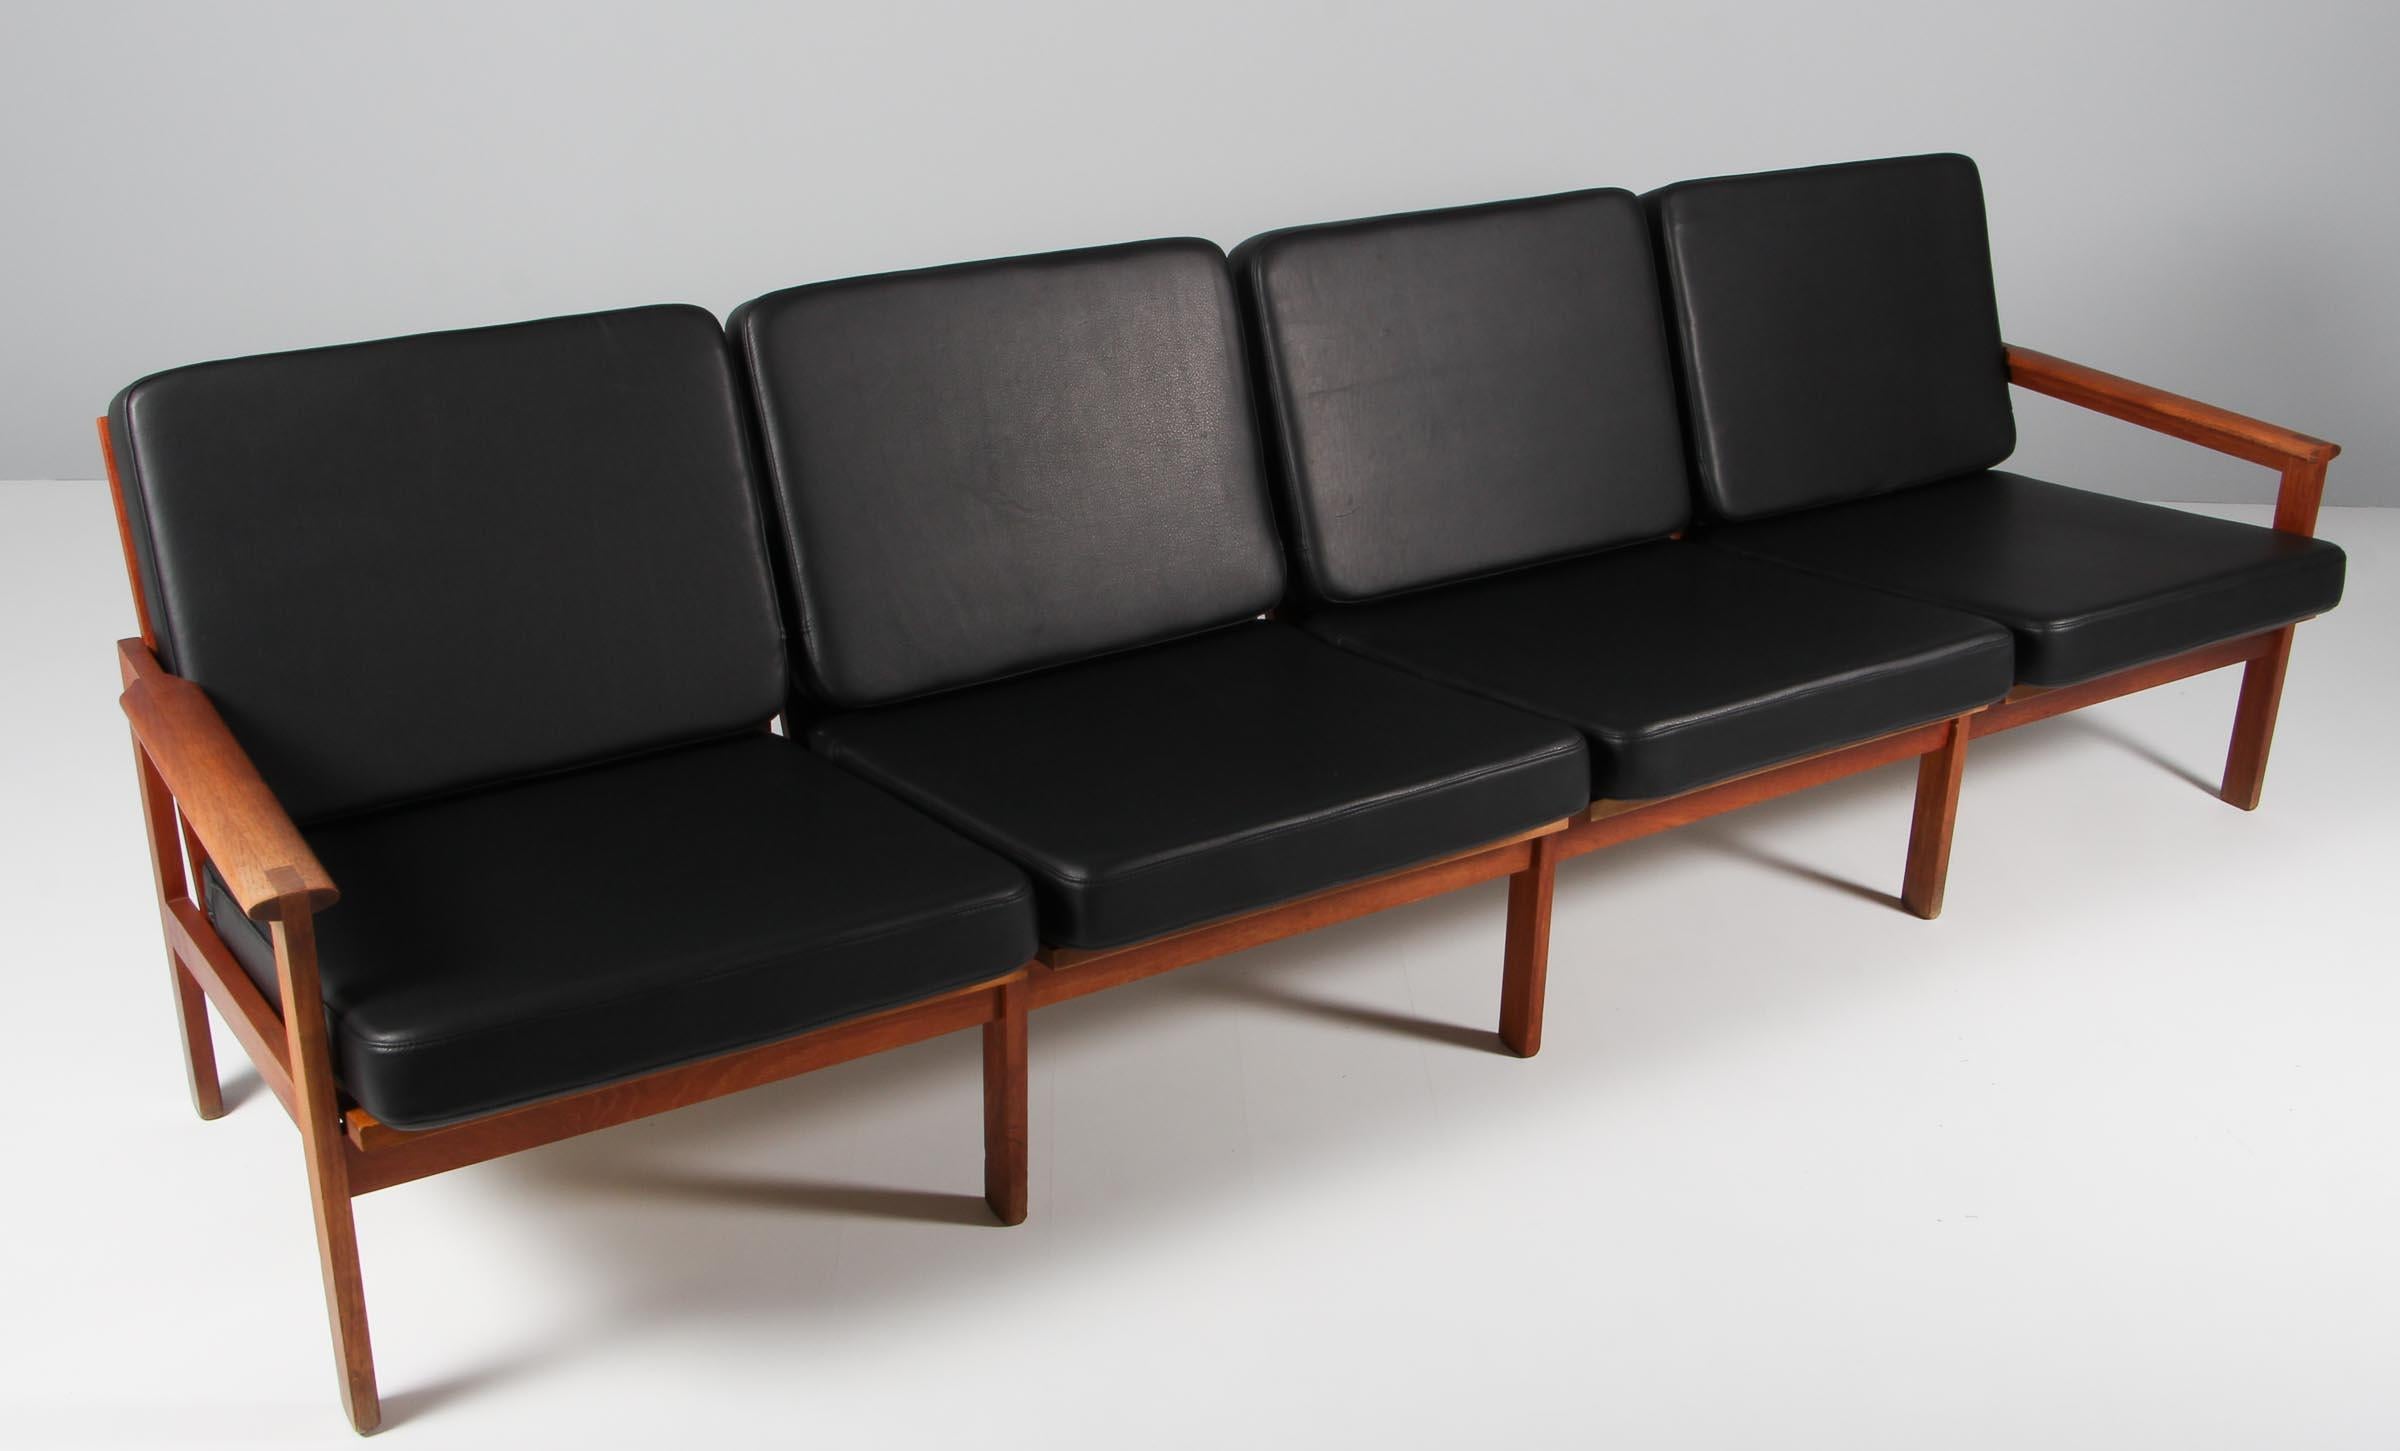 Illum Wikkelso for N. Eilersen four seat sofa in solid teak.

New upholstered with black aniline leather. 

Model Capella, made by N. Eilersen.
  